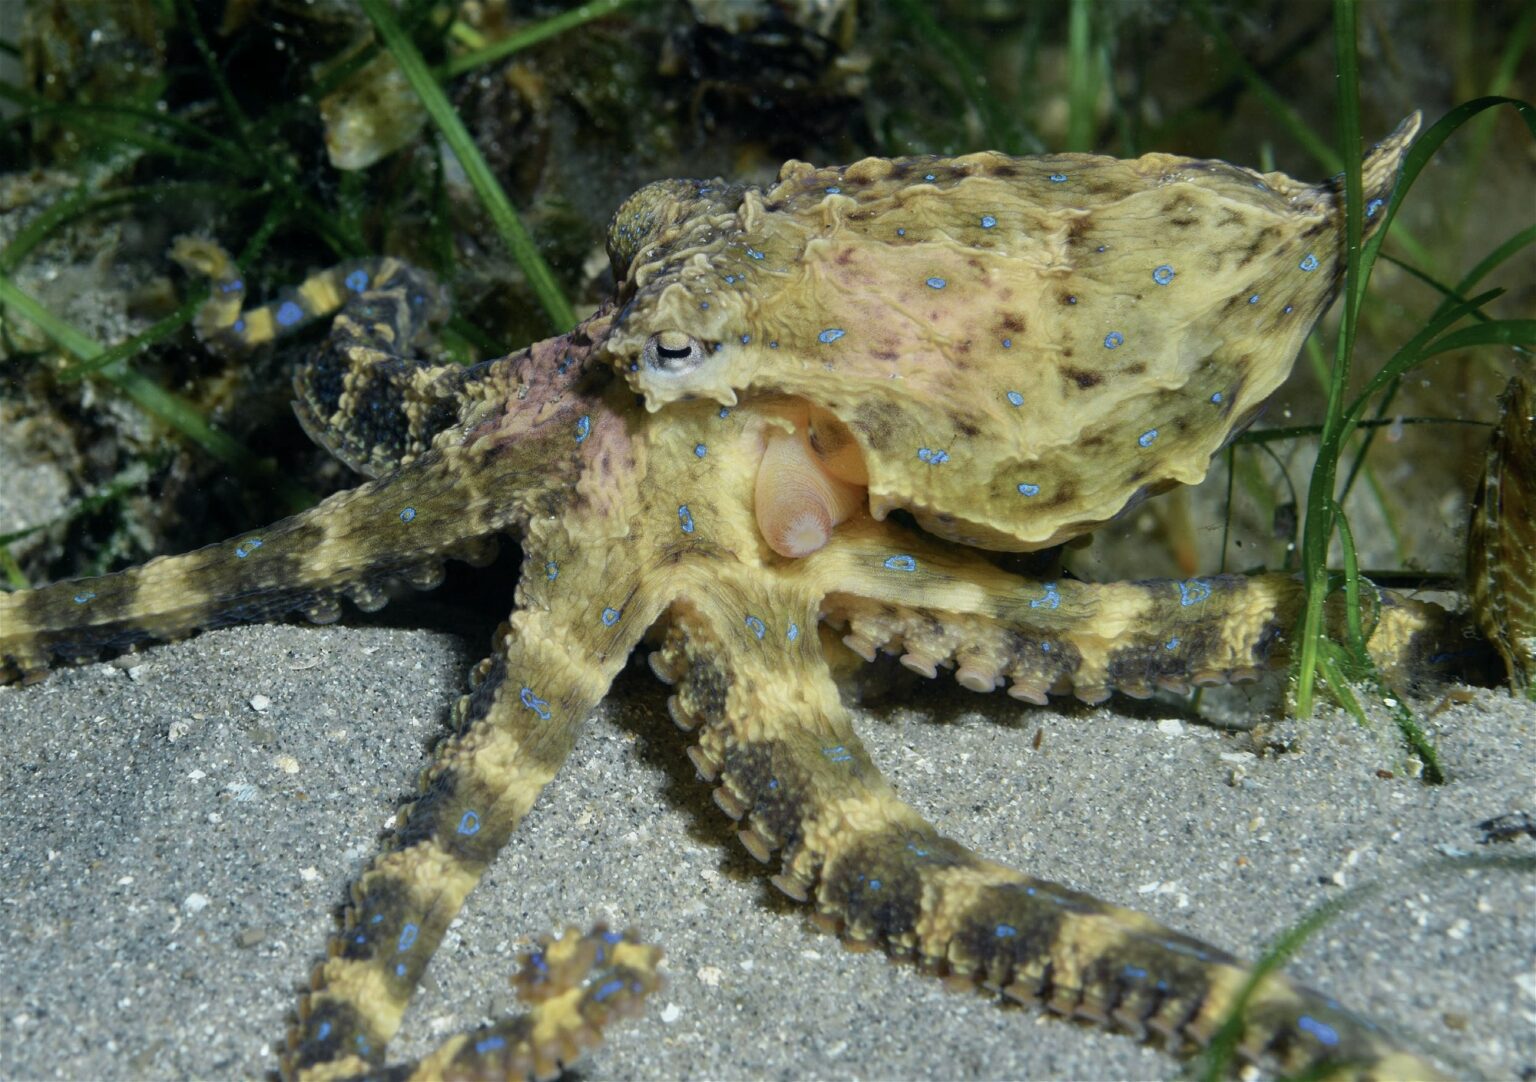 Southern blue-ringed octopus